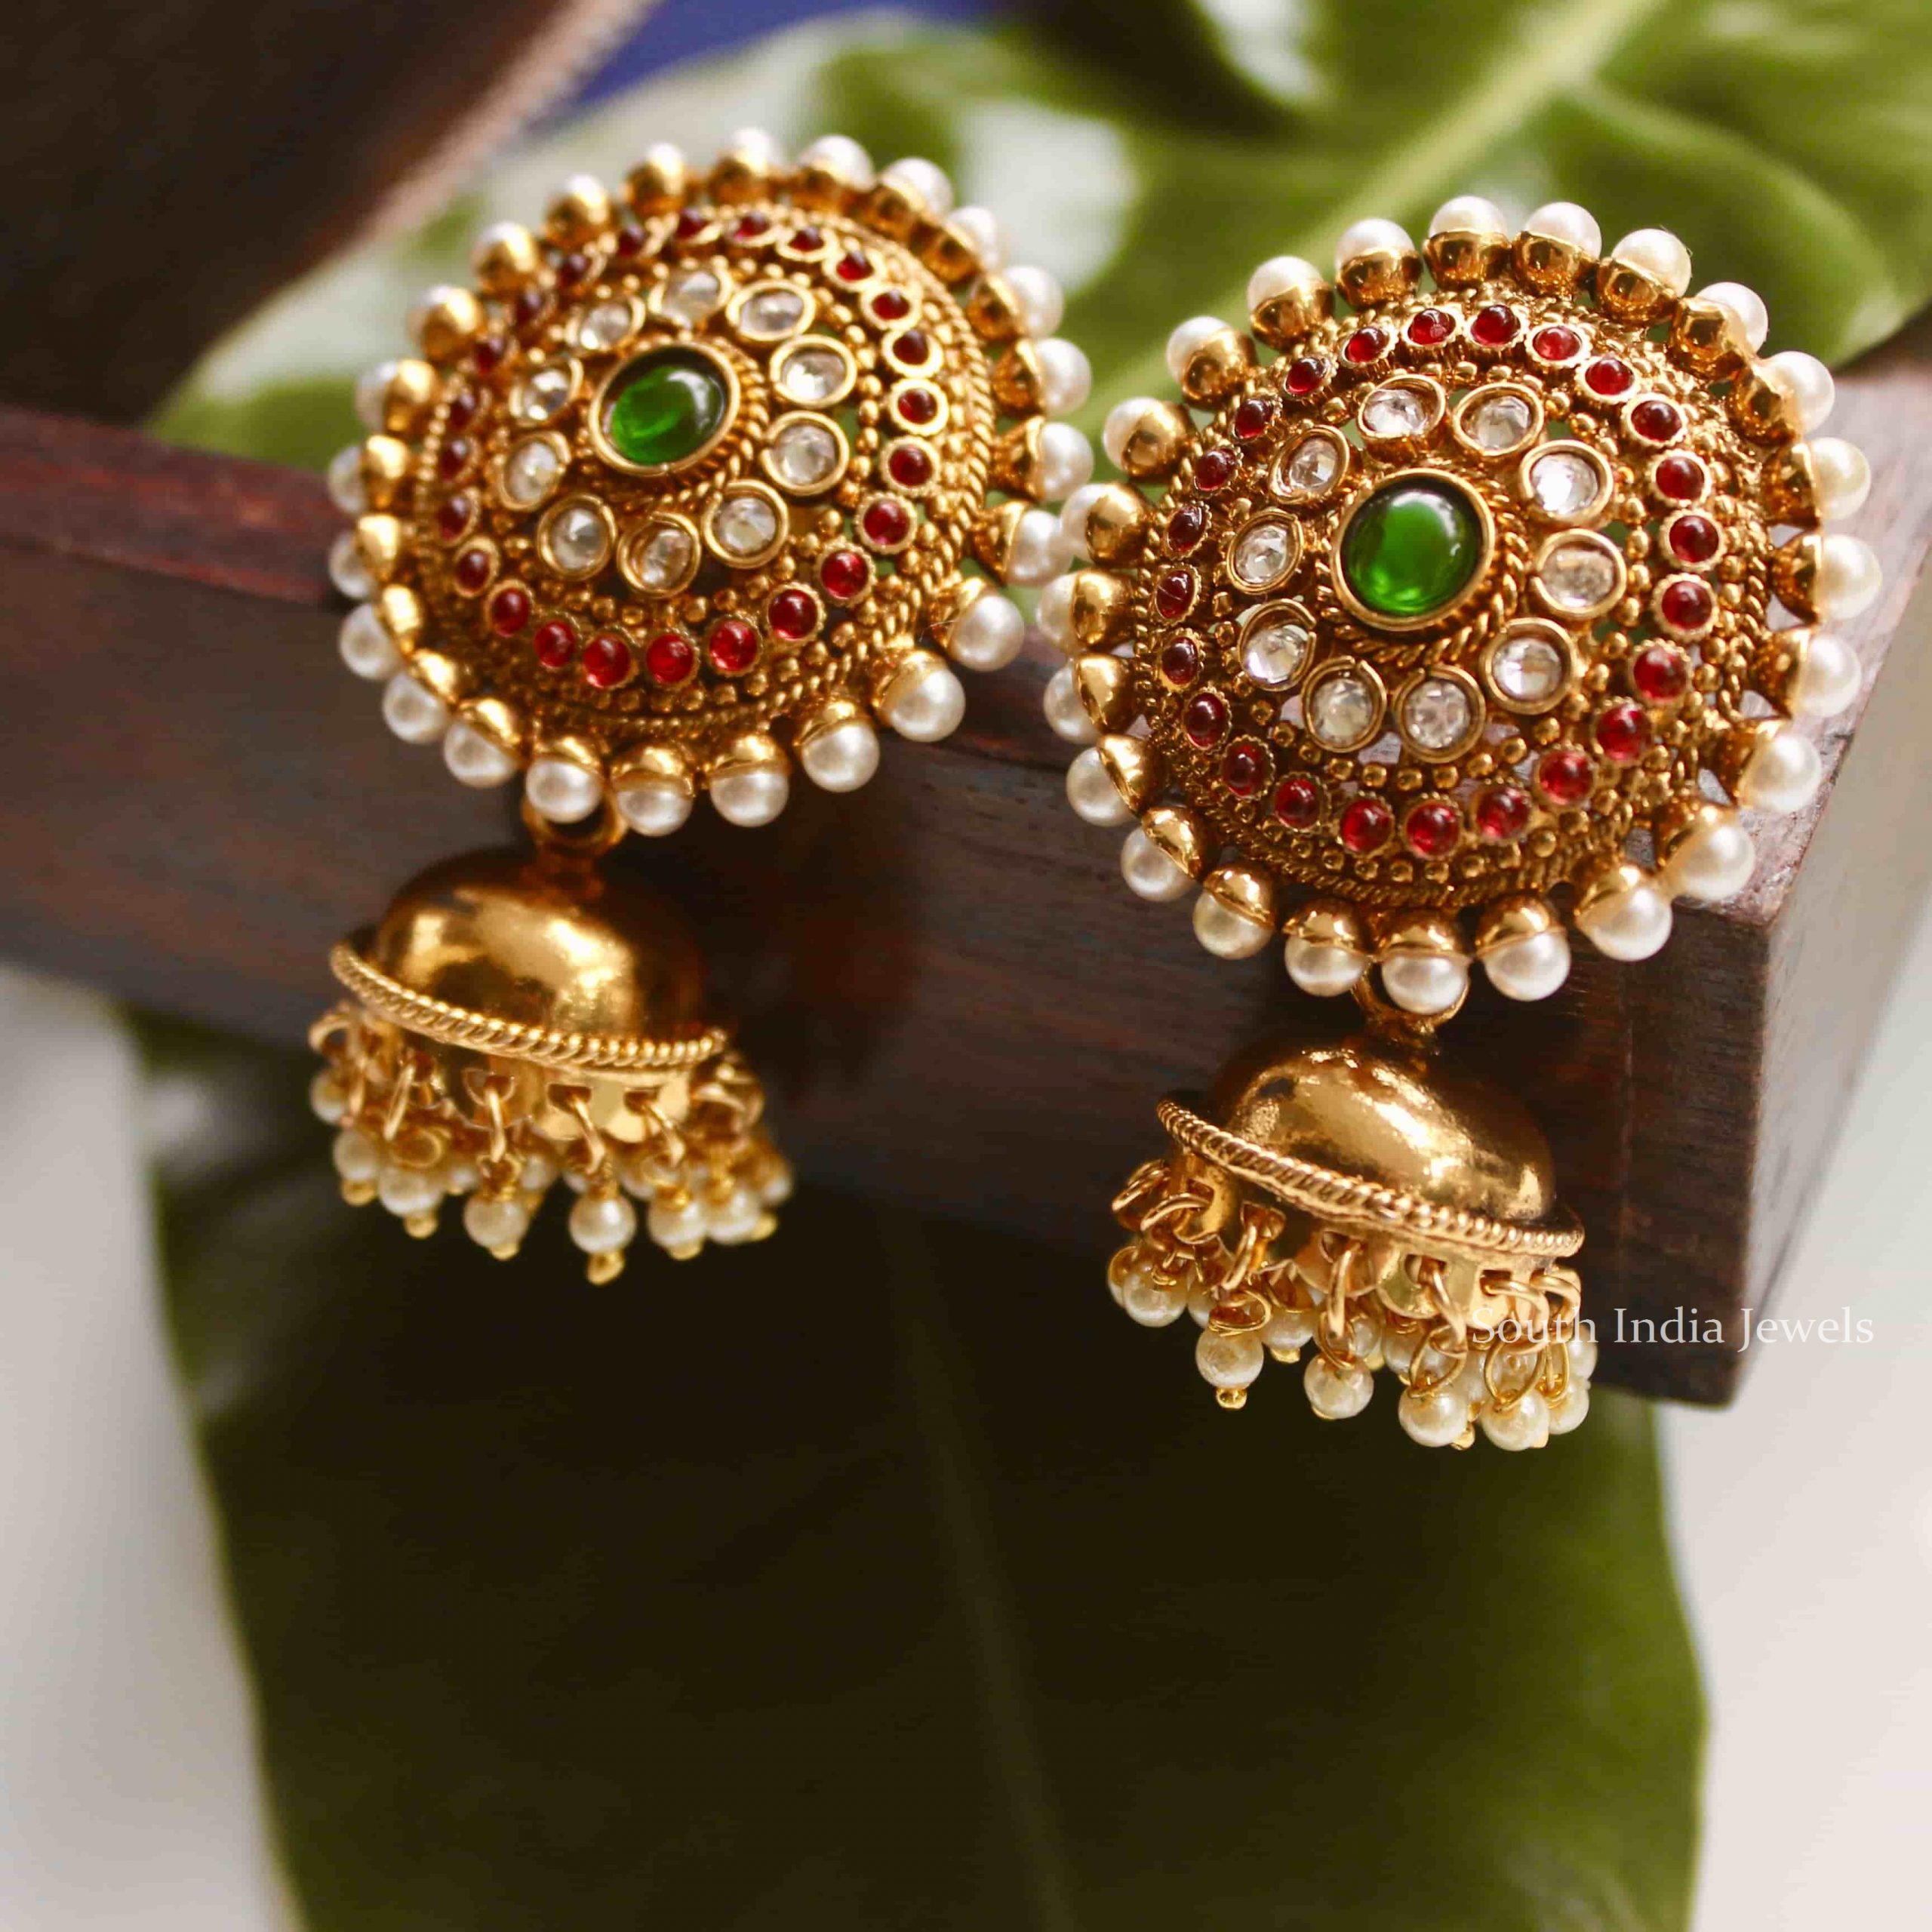 Matte Finish Peacock Design Pearl Jhumka  South India Jewels  Bridal gold jewellery  designs Gold earrings designs Gold jewellery design necklaces